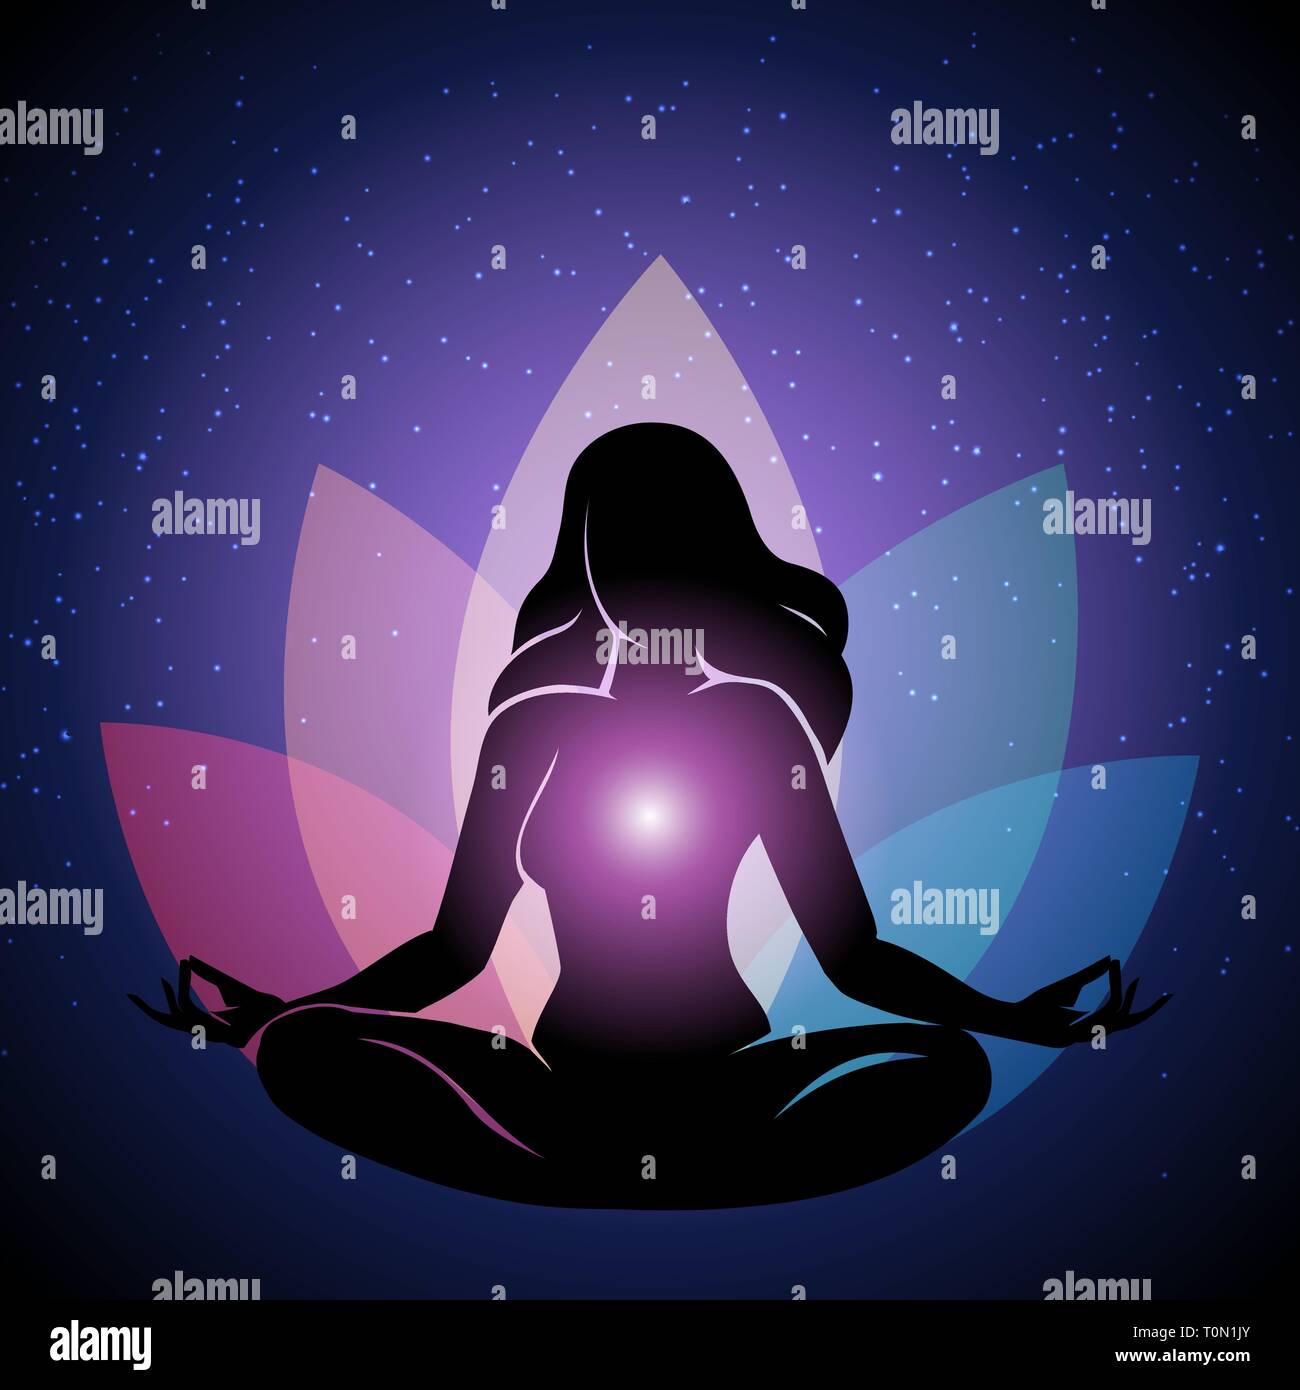 Human silhouette in Yoga pose with lotus flower and night sky on background. Vector illustration. Stock Vector